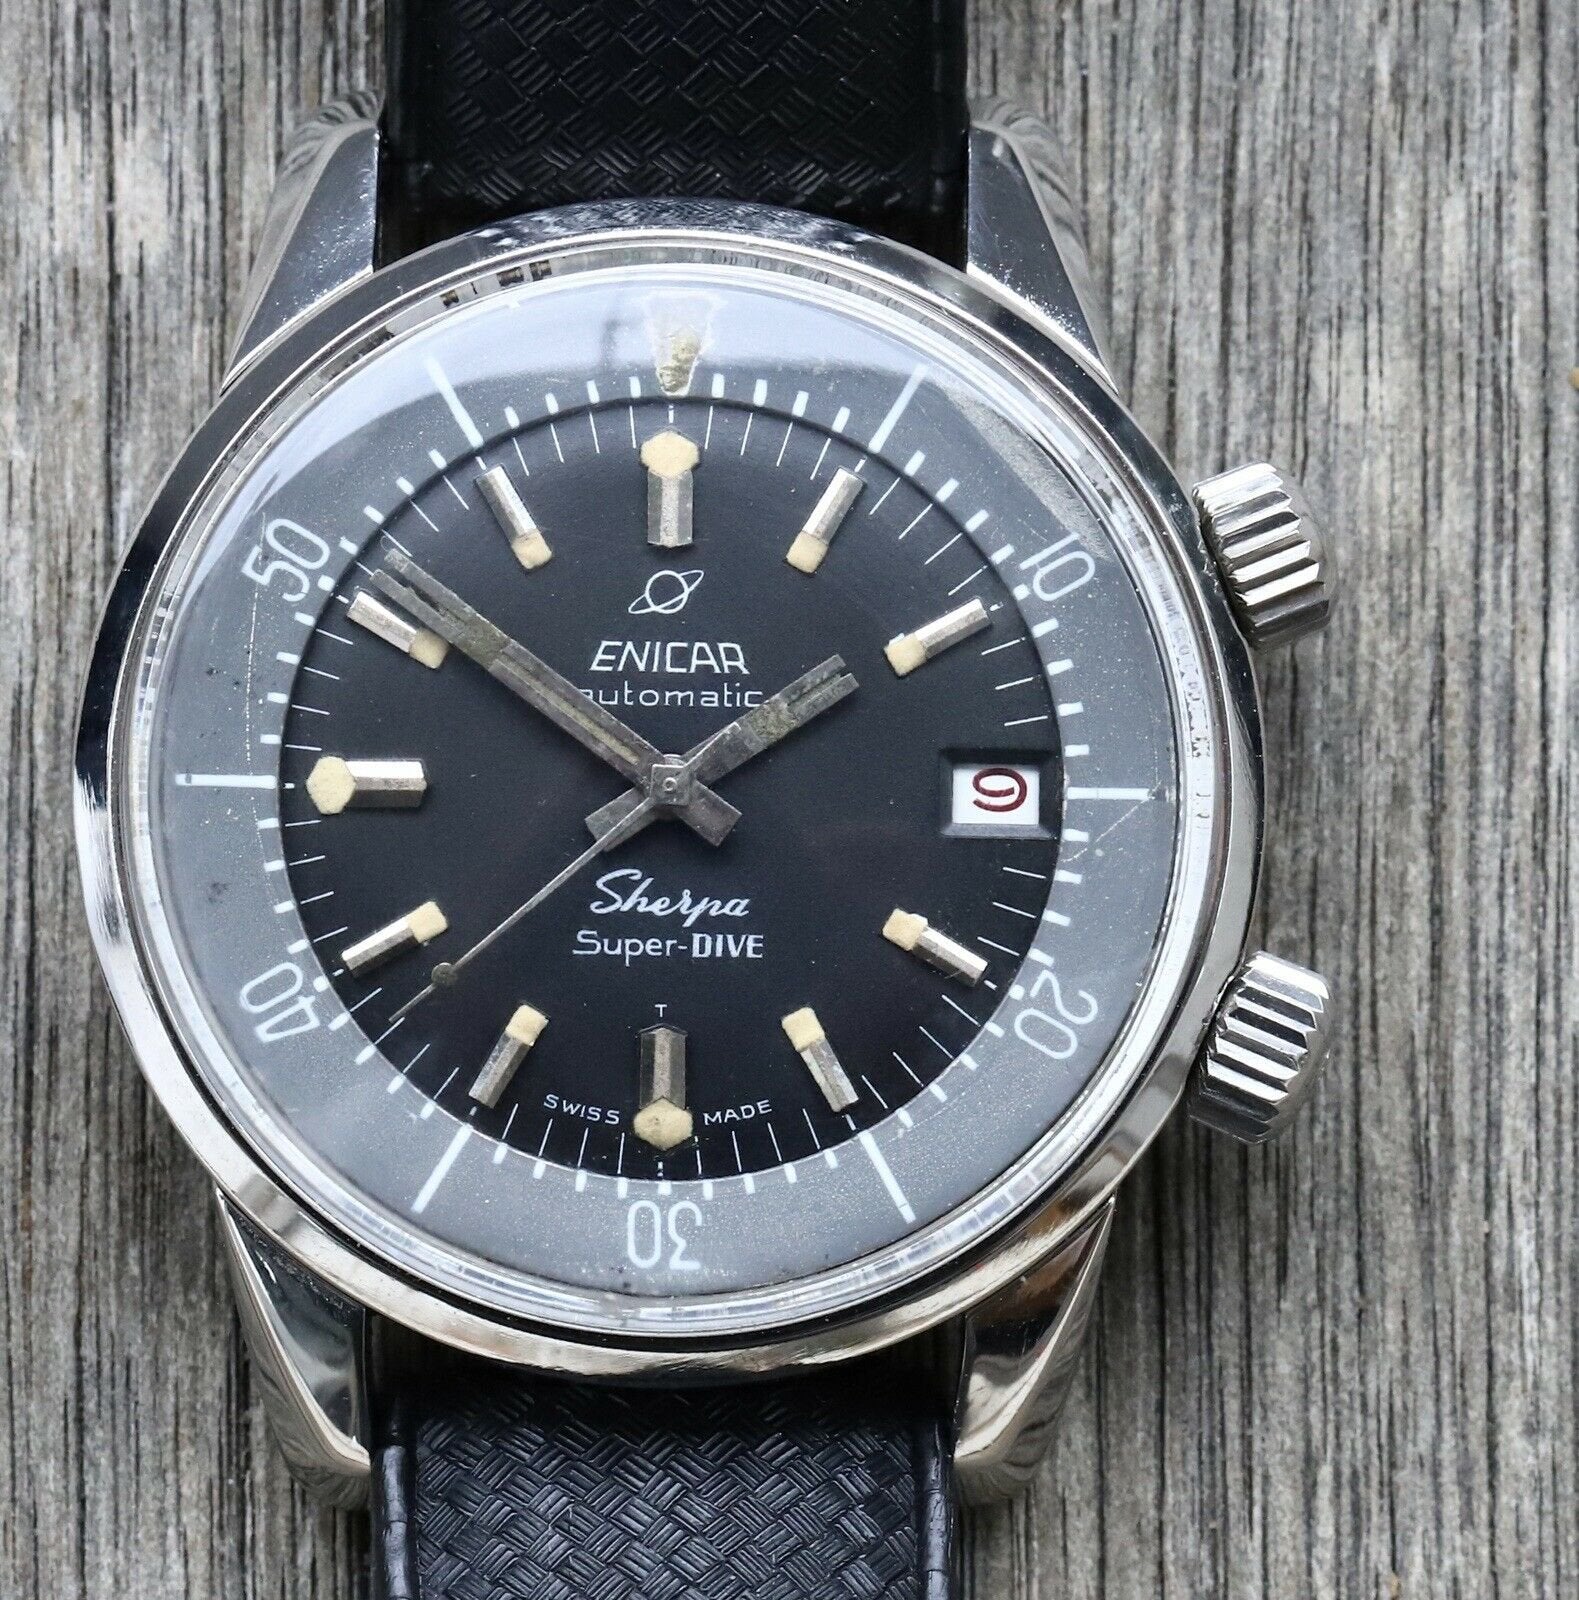 Enicar_Sherpa_600_Super_Dive_144-35-02_Military_Issue_Watch_Vault_01.jpg